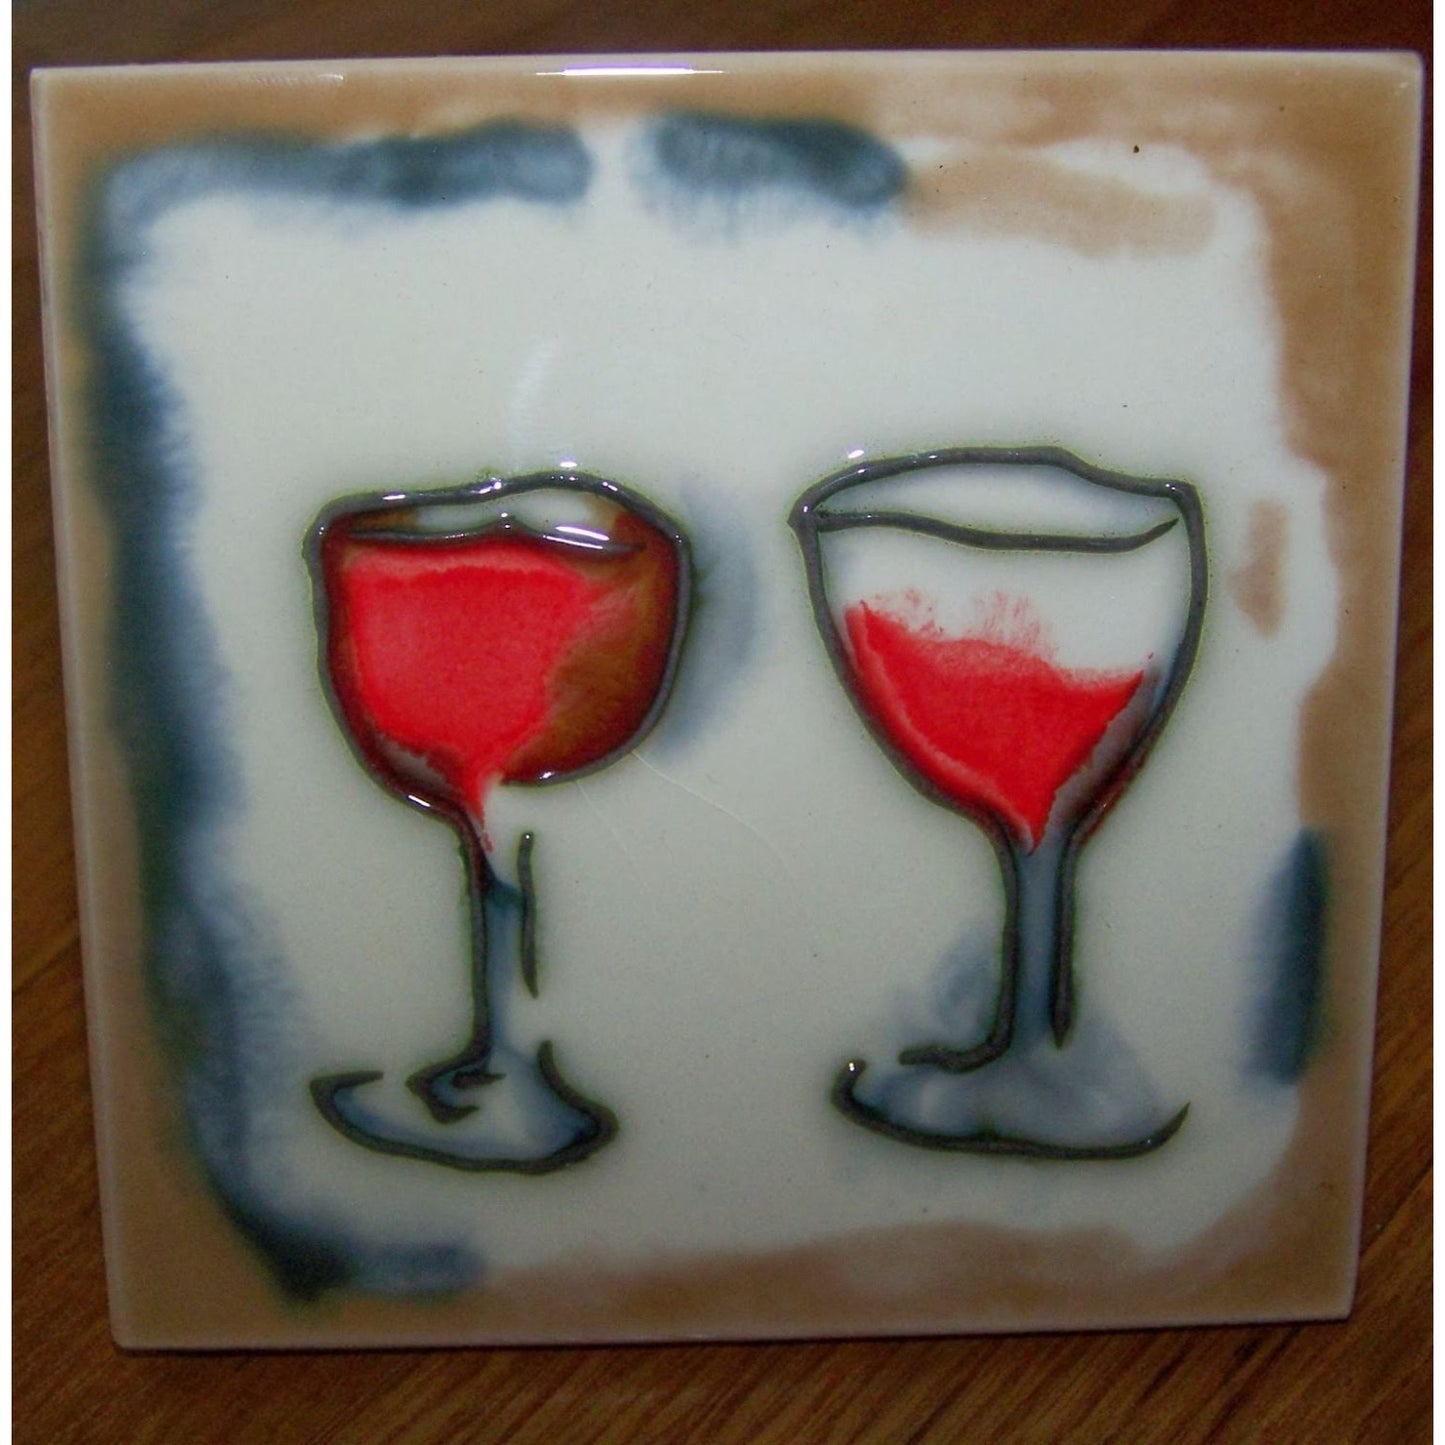 Art Tile 4" x 4" Muddy Waters Hand Painted 7A031 ArtWork on Tile Wine 3 Two Wine Glasses 1/2 " Ceramic Tile and backing